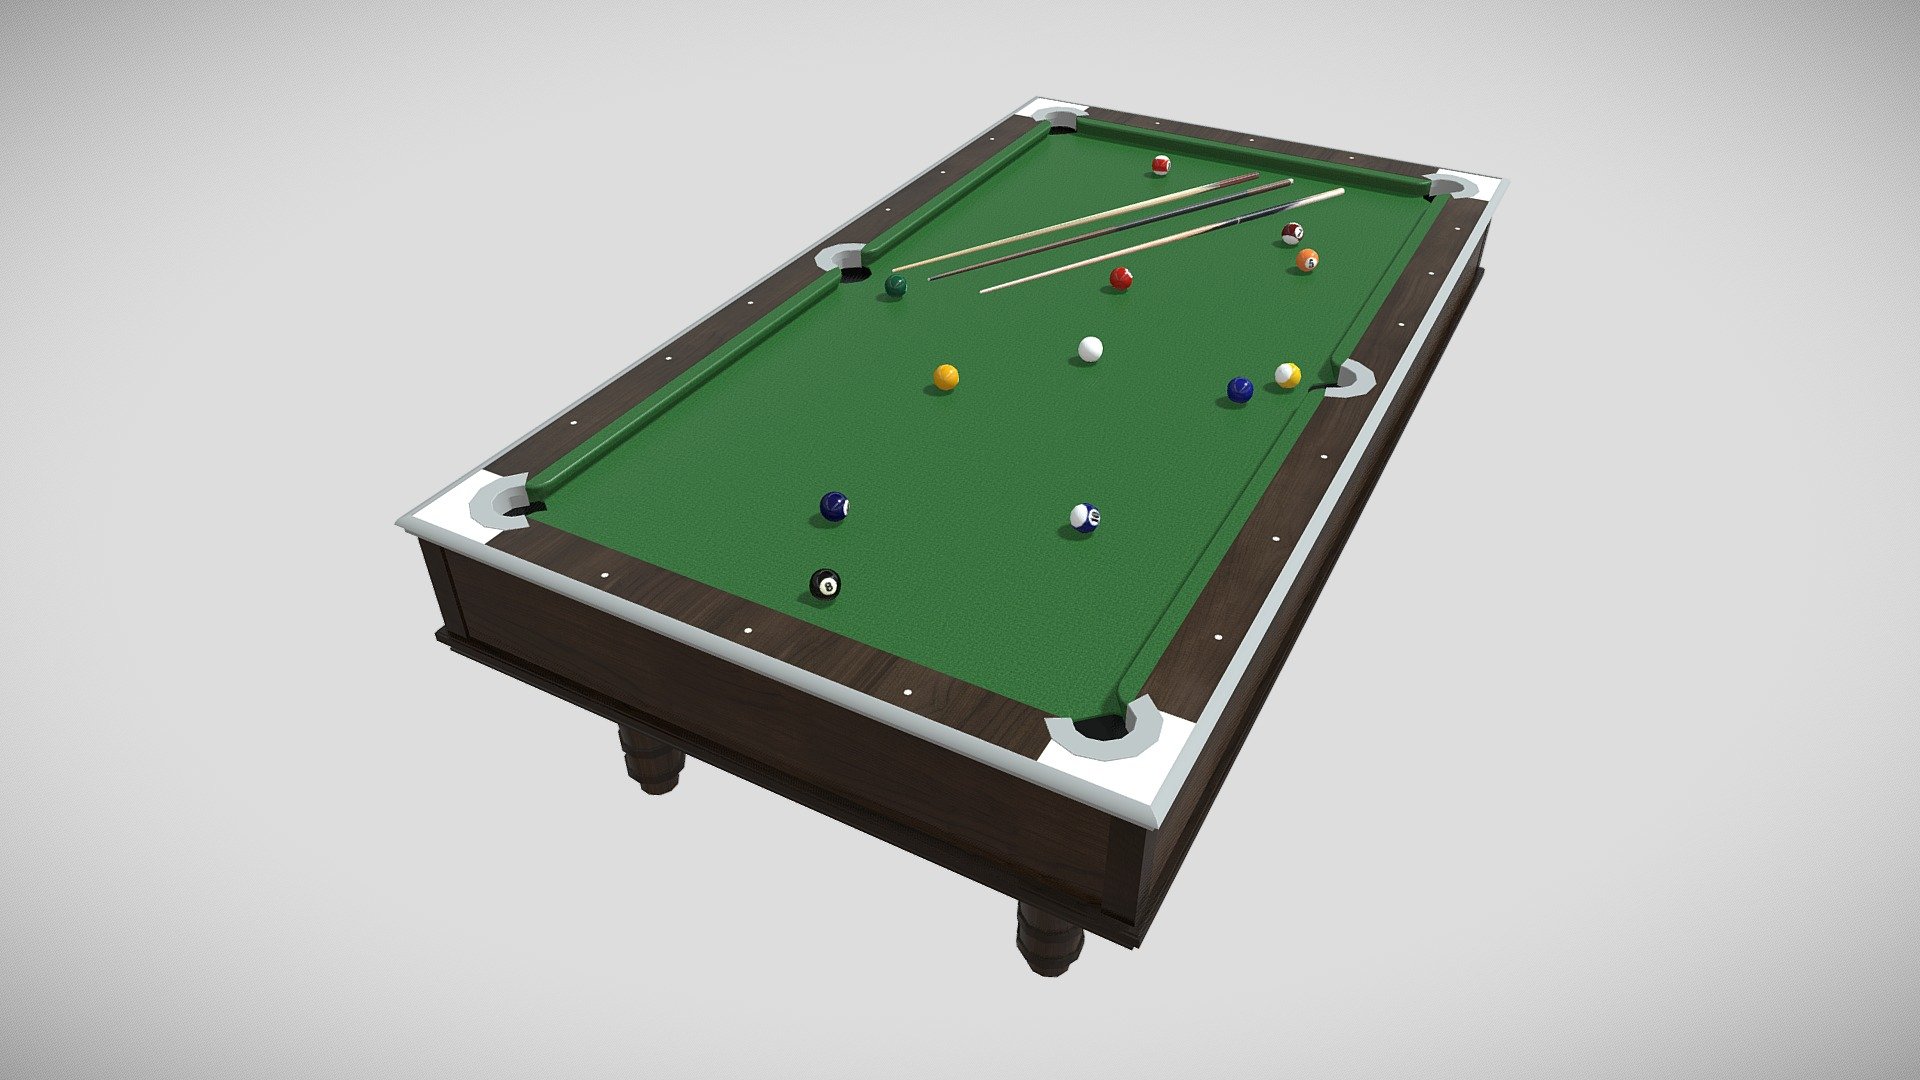 Download Free Billiard Masters 3D Game for Computer [Download Link  Available]